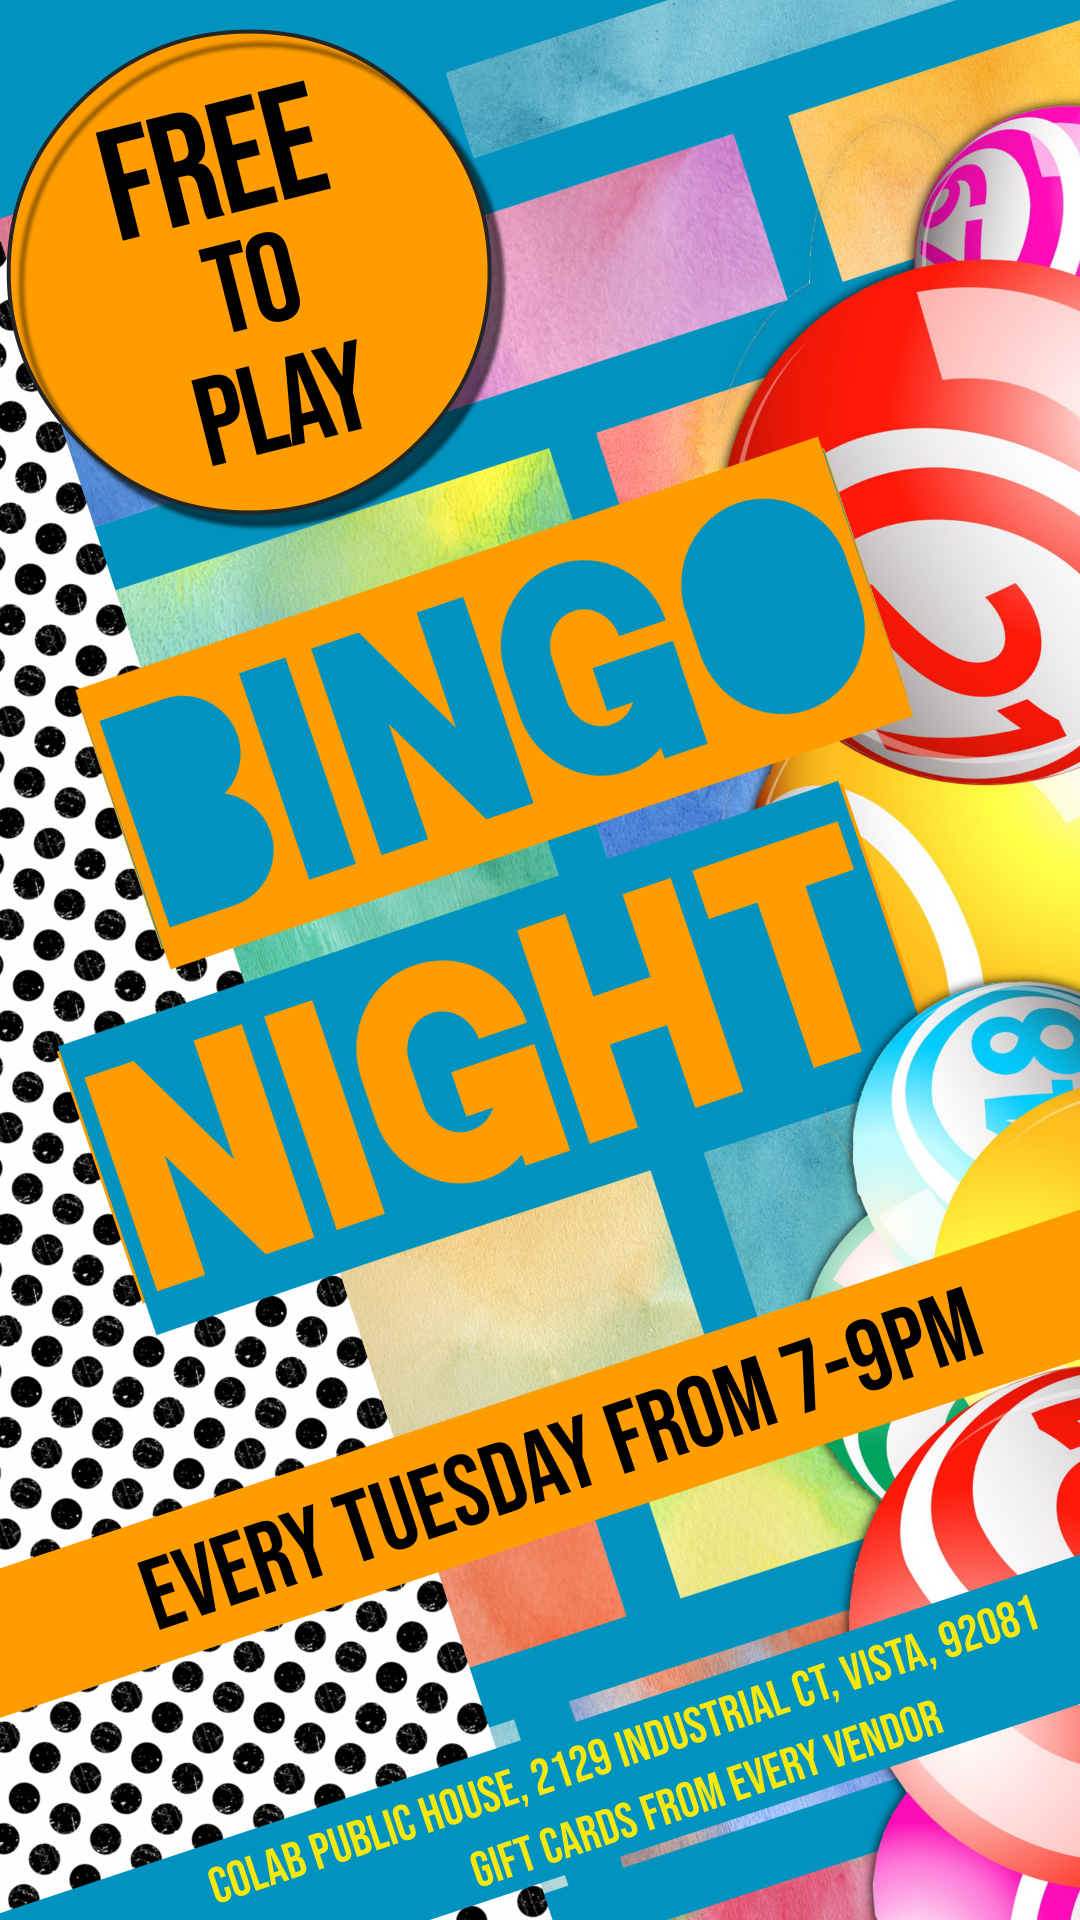 Free to Play, Bingo Night, Every Tuesday from 7 to 9 PM